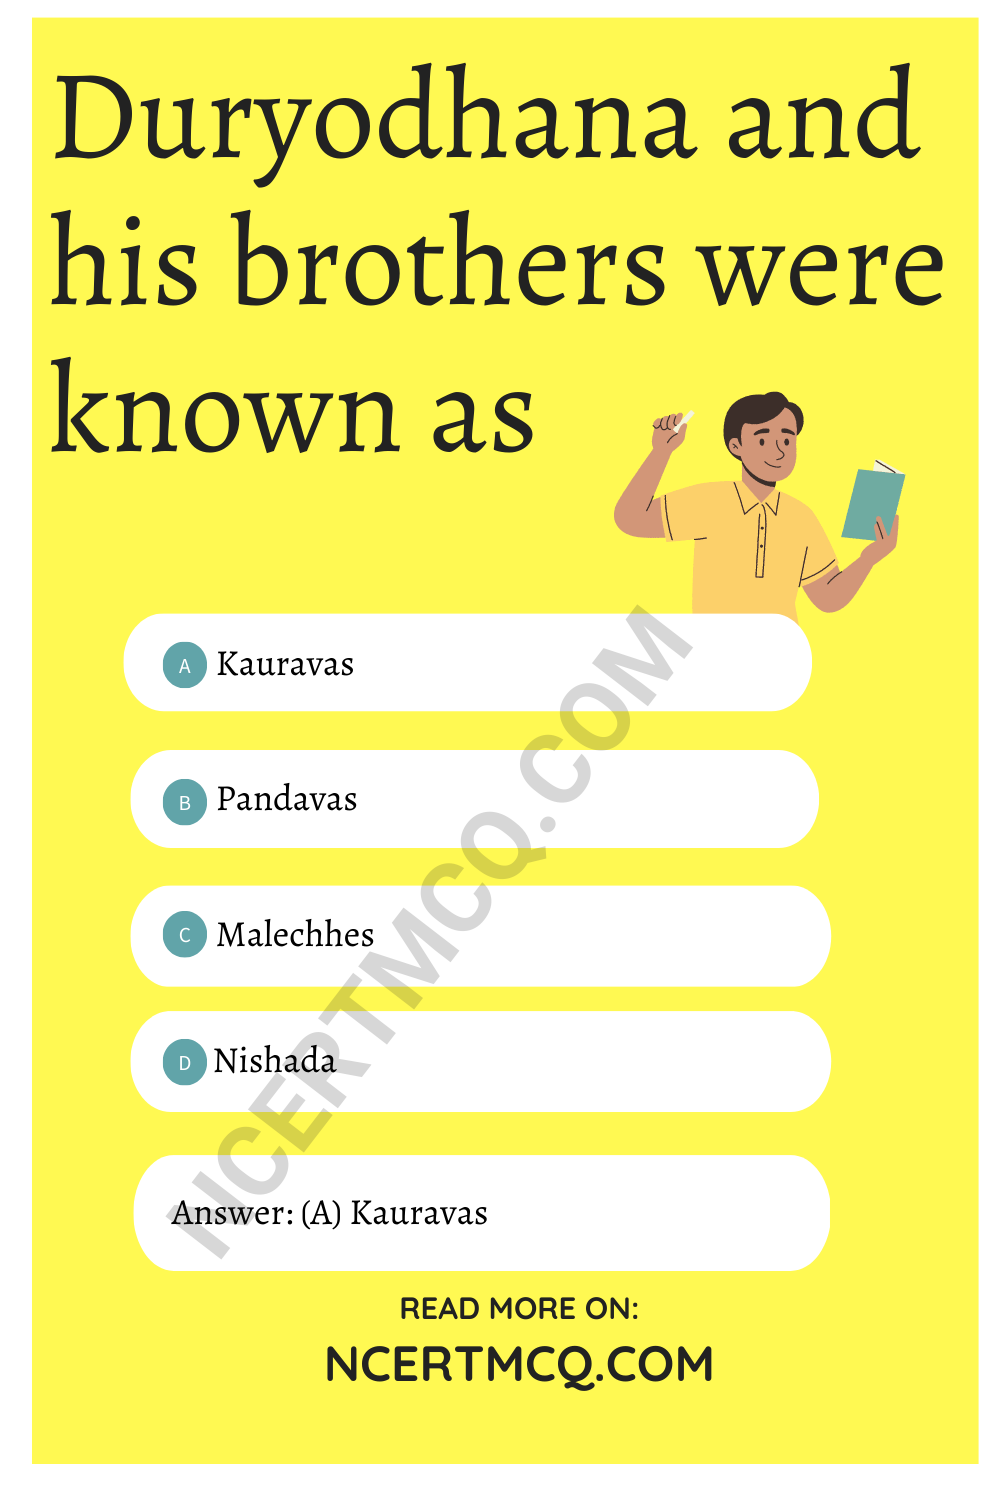 Duryodhana and his brothers were known as